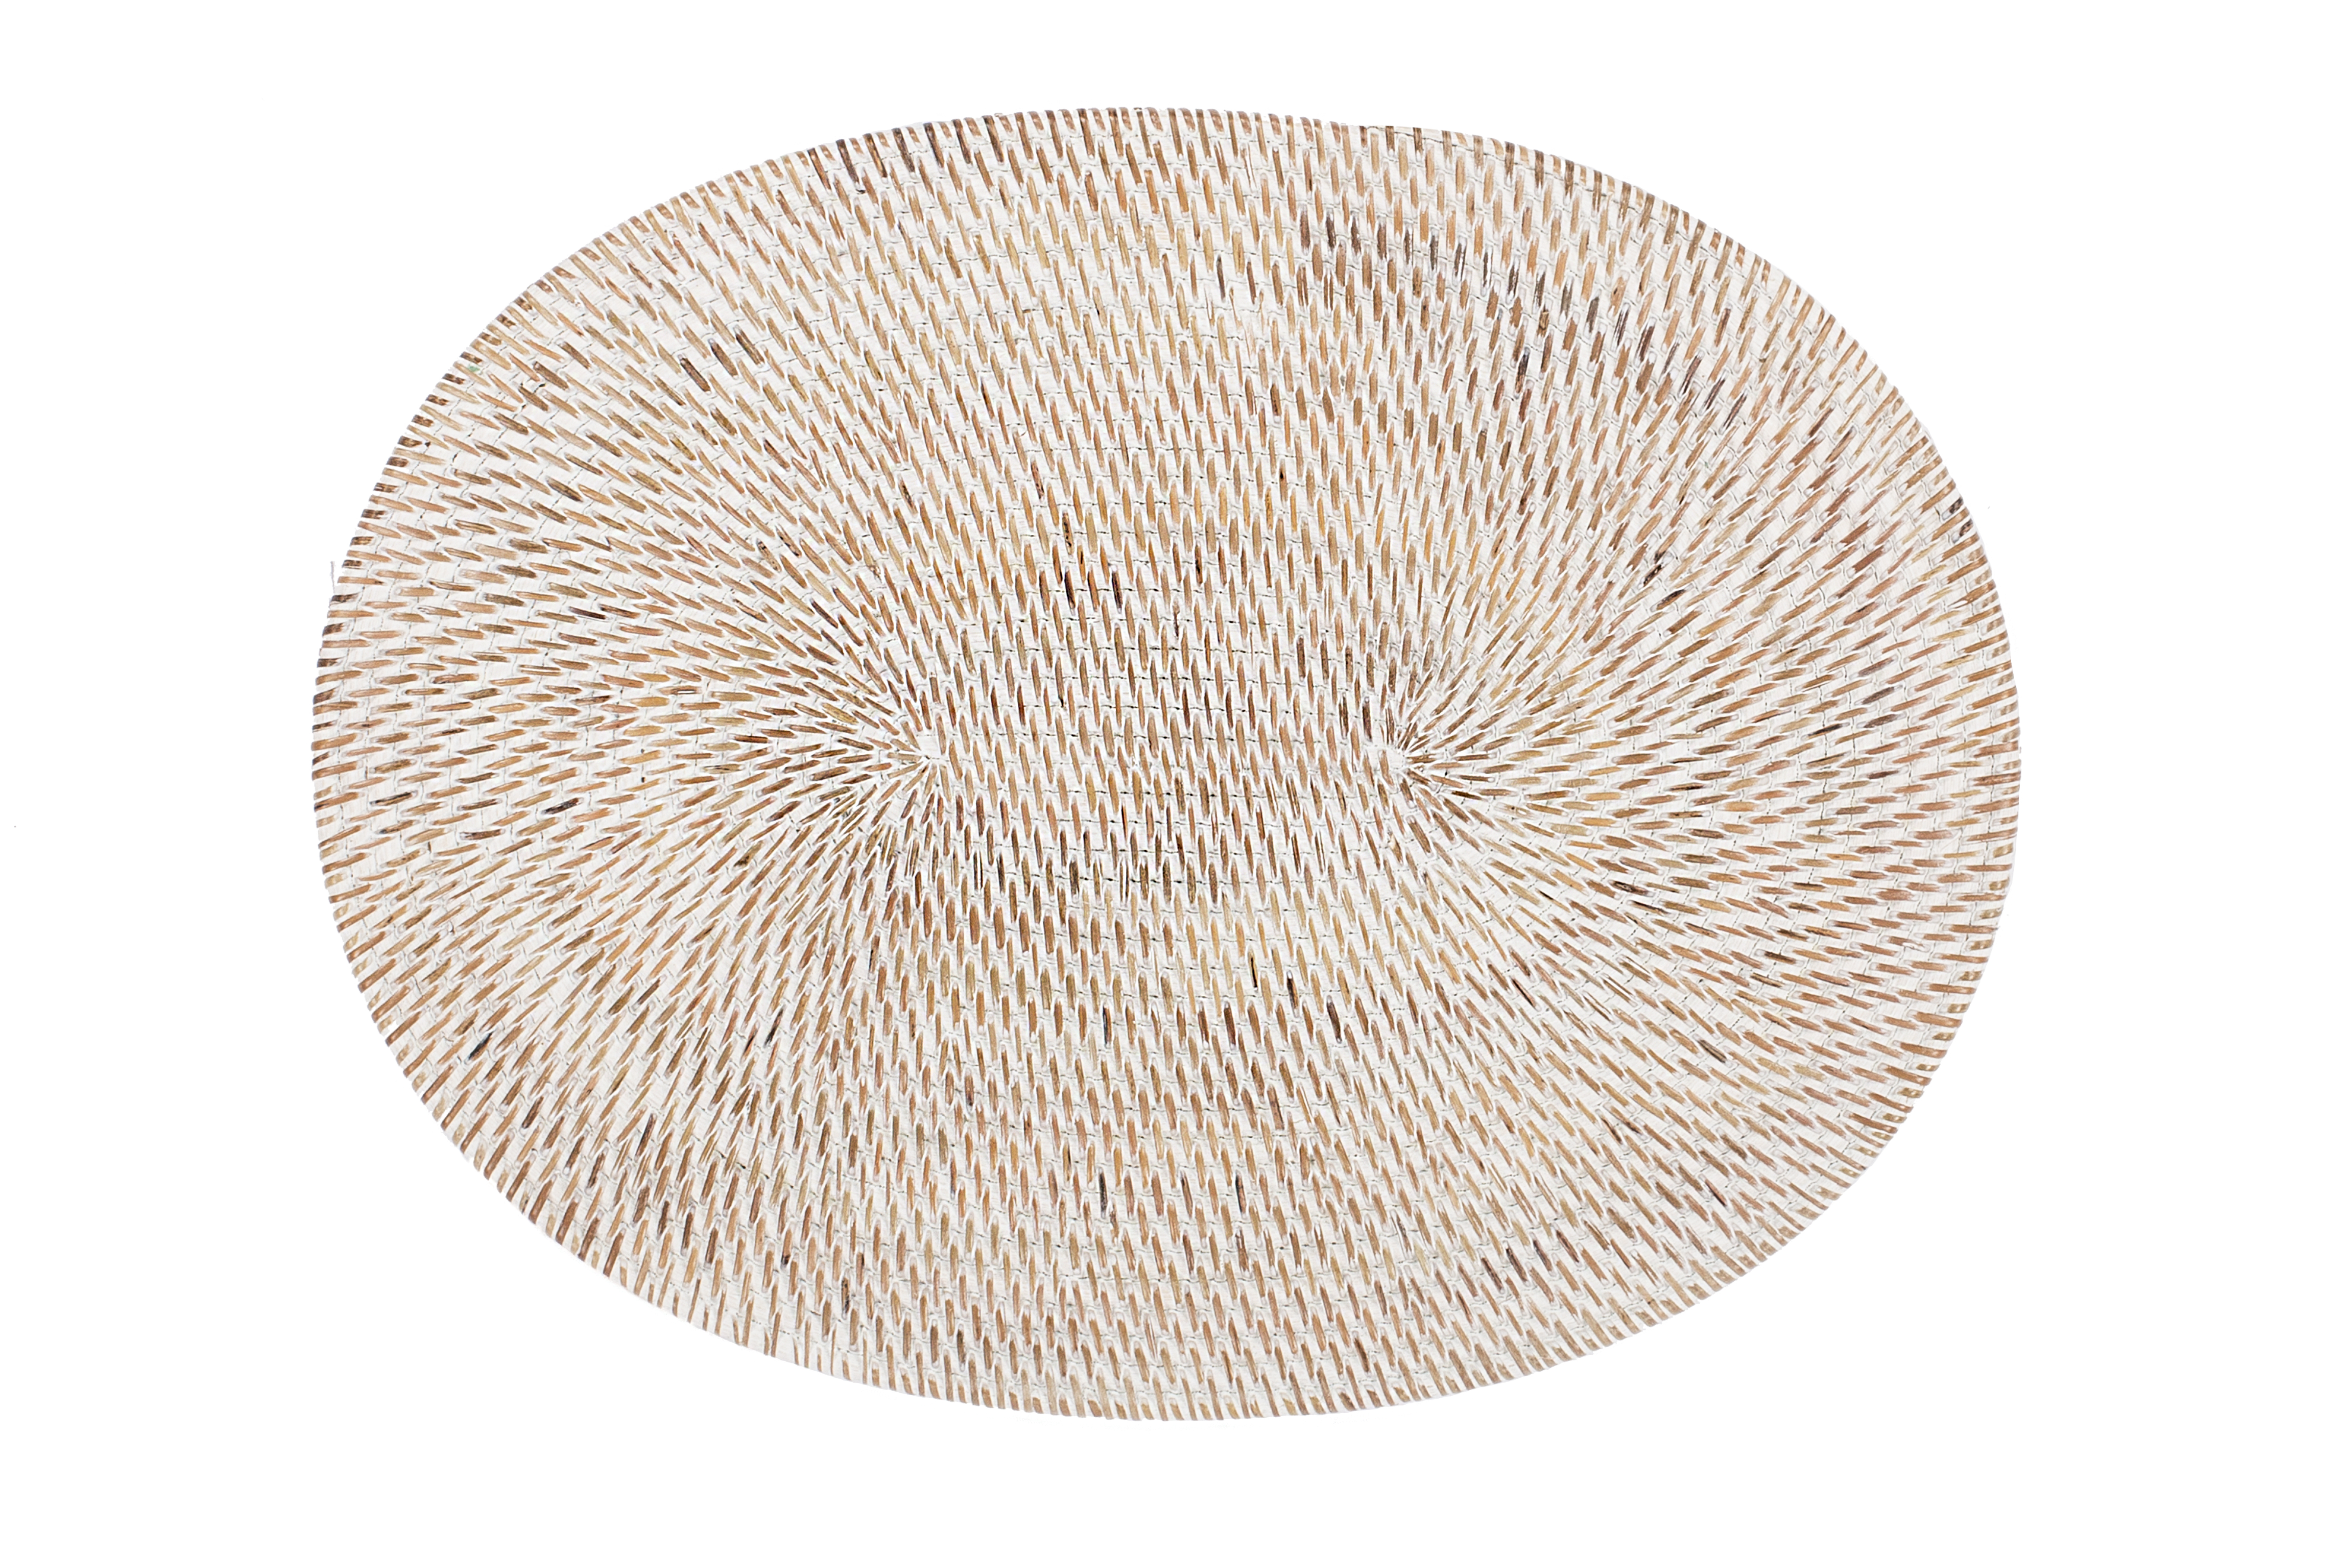 Placemat rattan 30x40 cm, oval, white